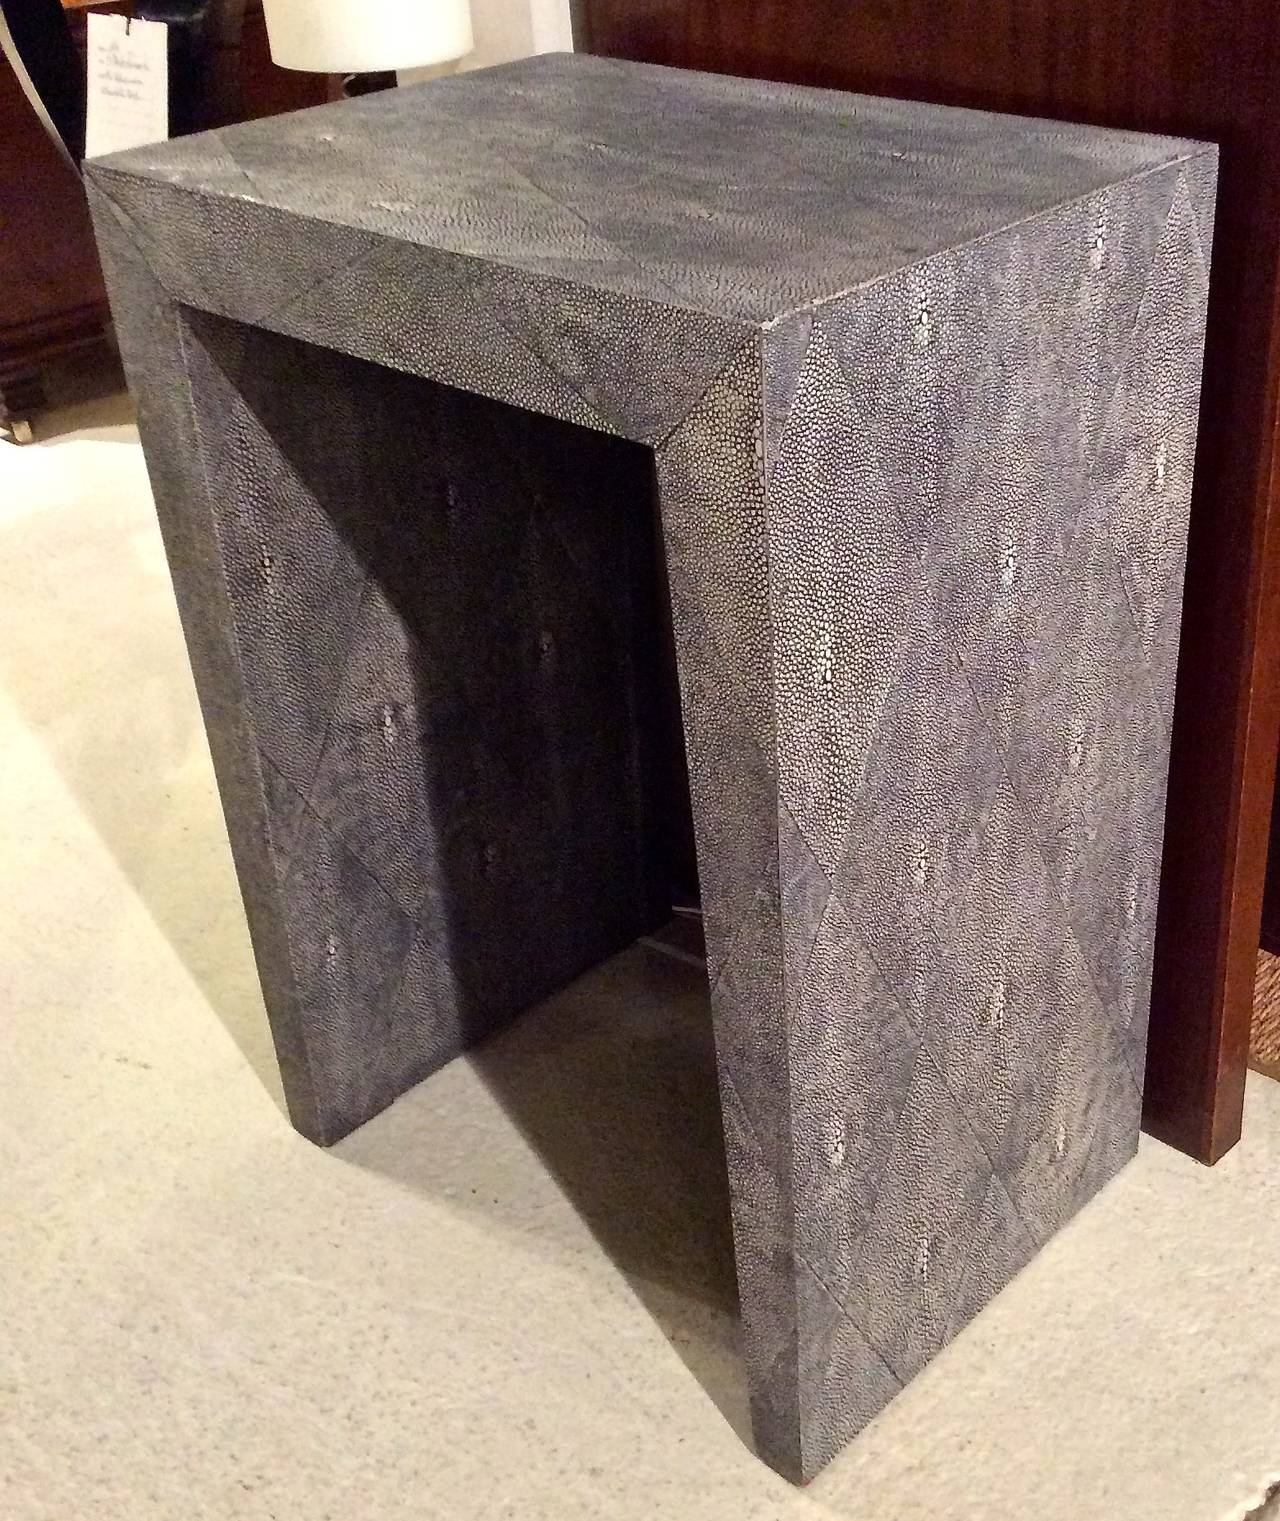 Beautiful vintage side table fully sheathed in shagreen. Beautiful steel grey skins masterfully designed in a diamond pattern, with a great subtle sheen.